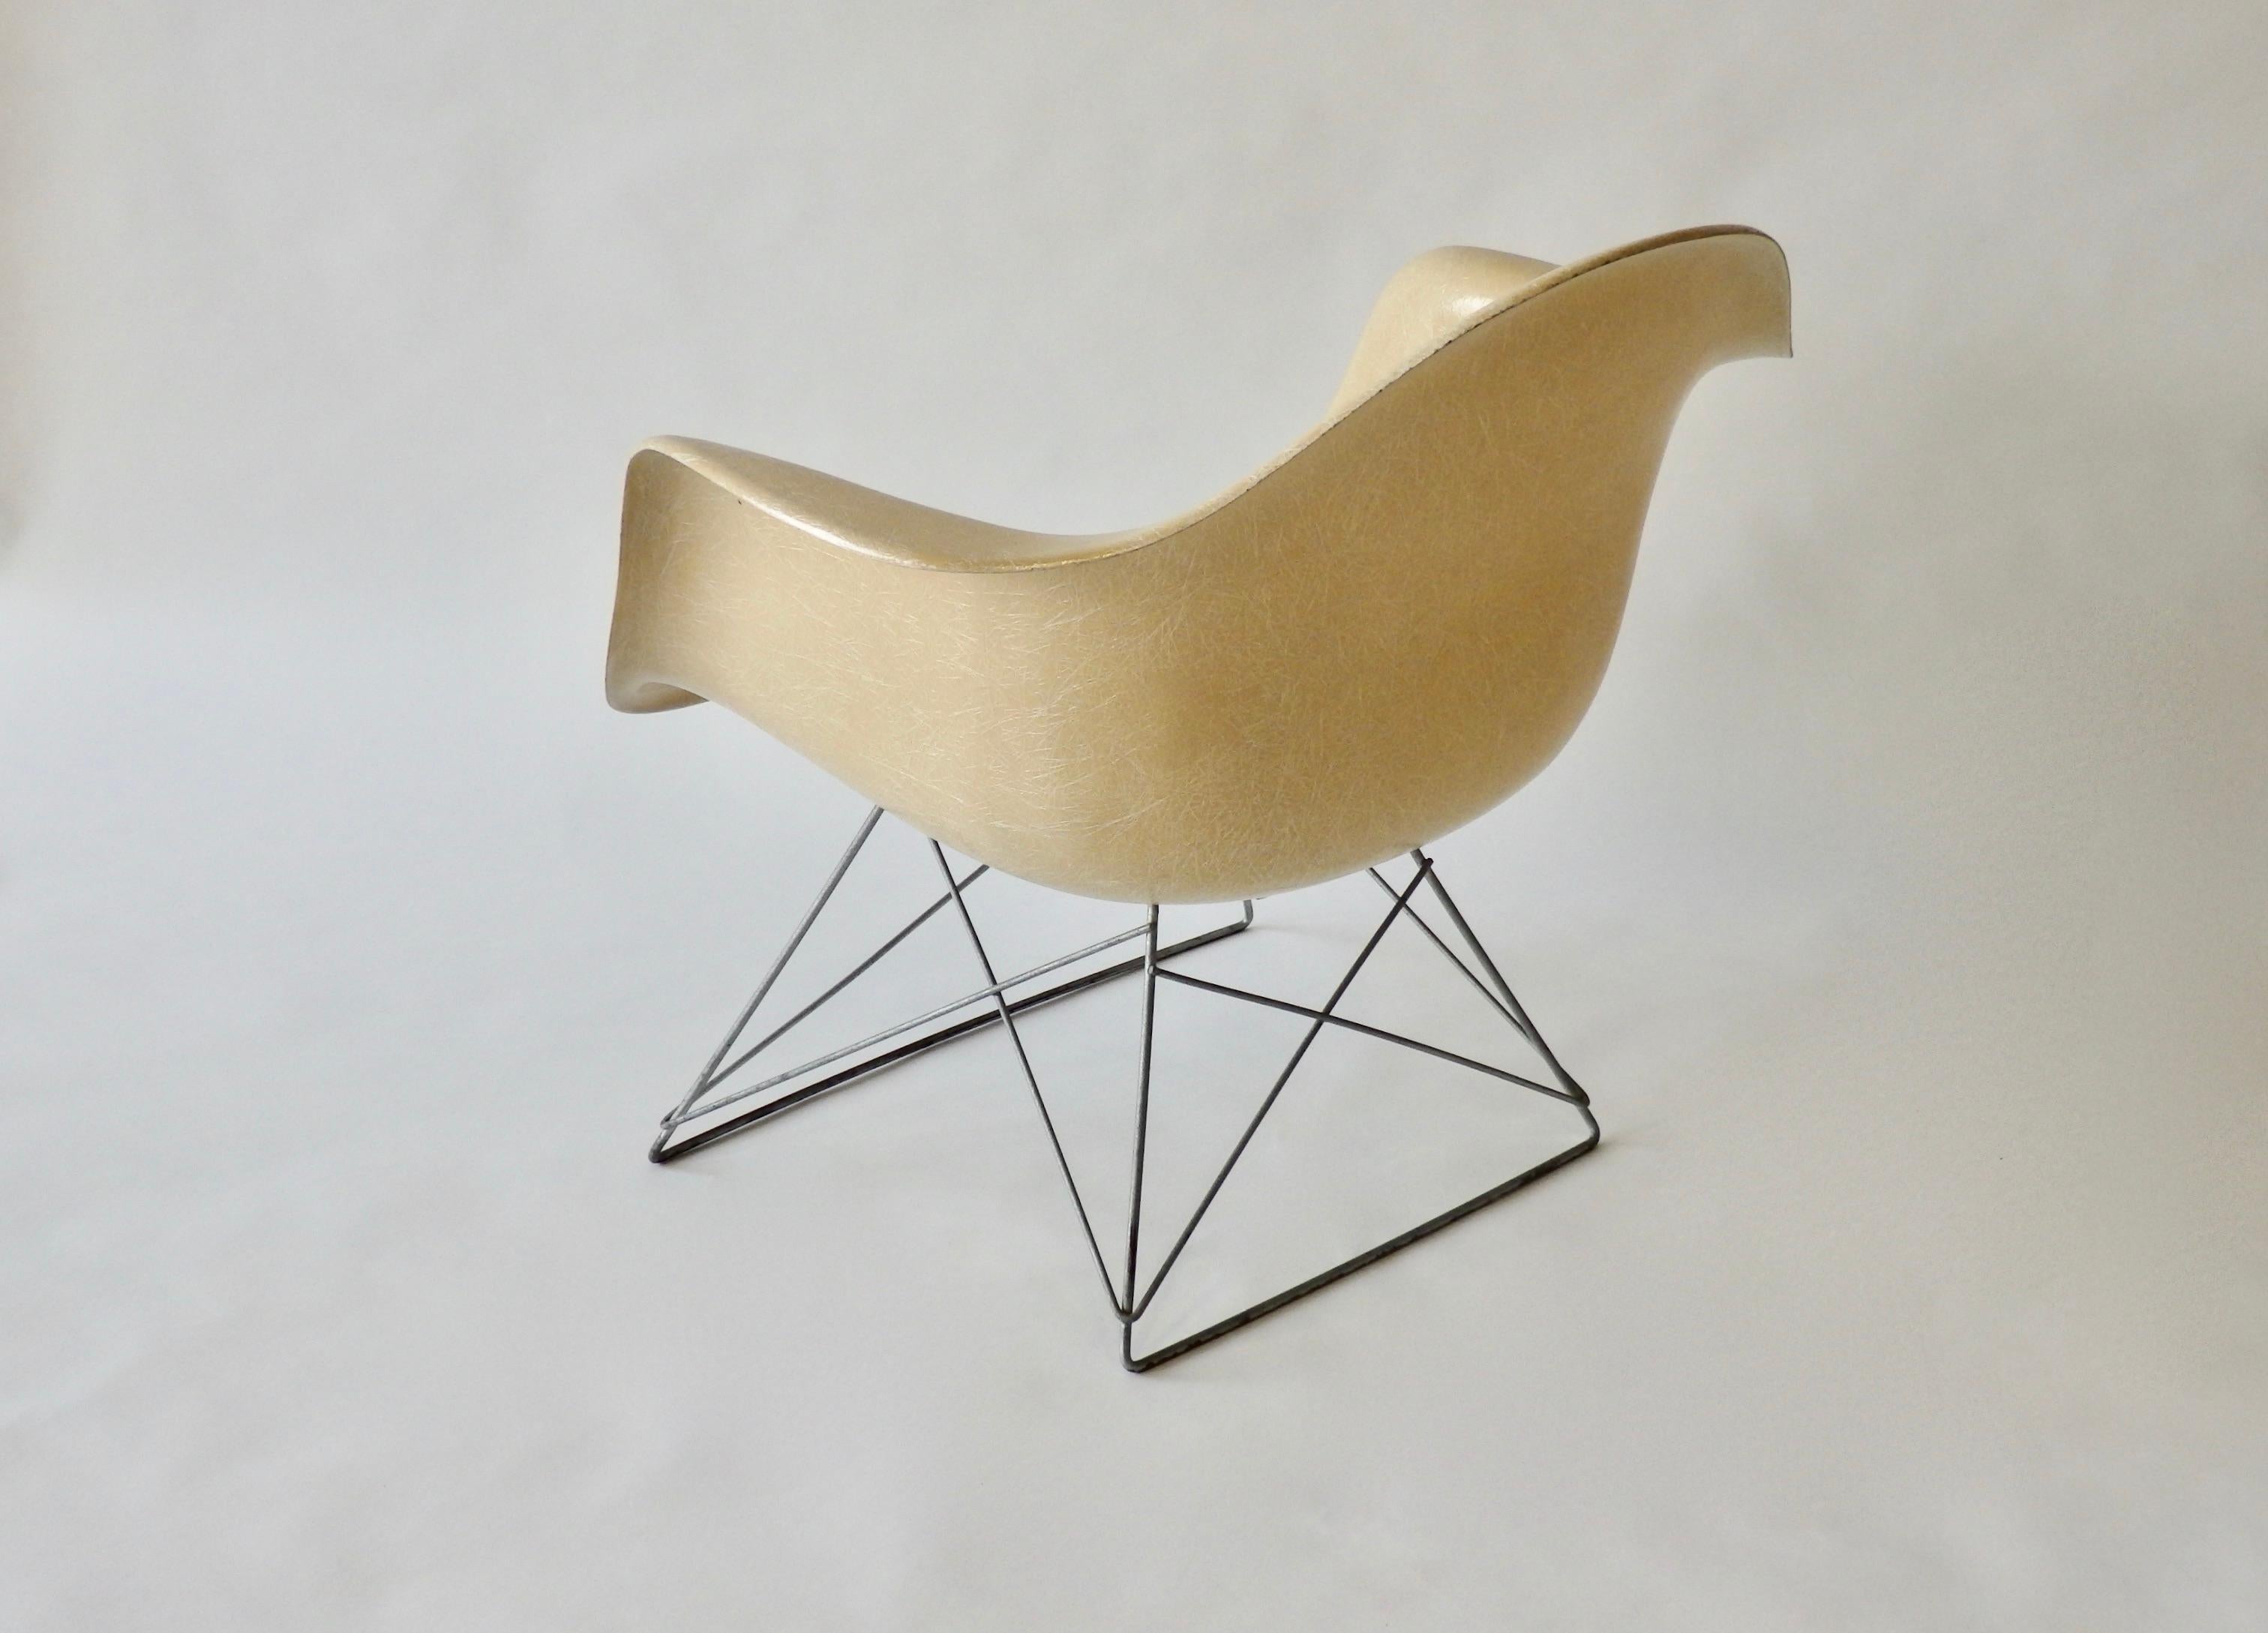 Eames LAR Cats Cradle Base Fiberglass Armshell Lounge Chair In Good Condition For Sale In Ferndale, MI